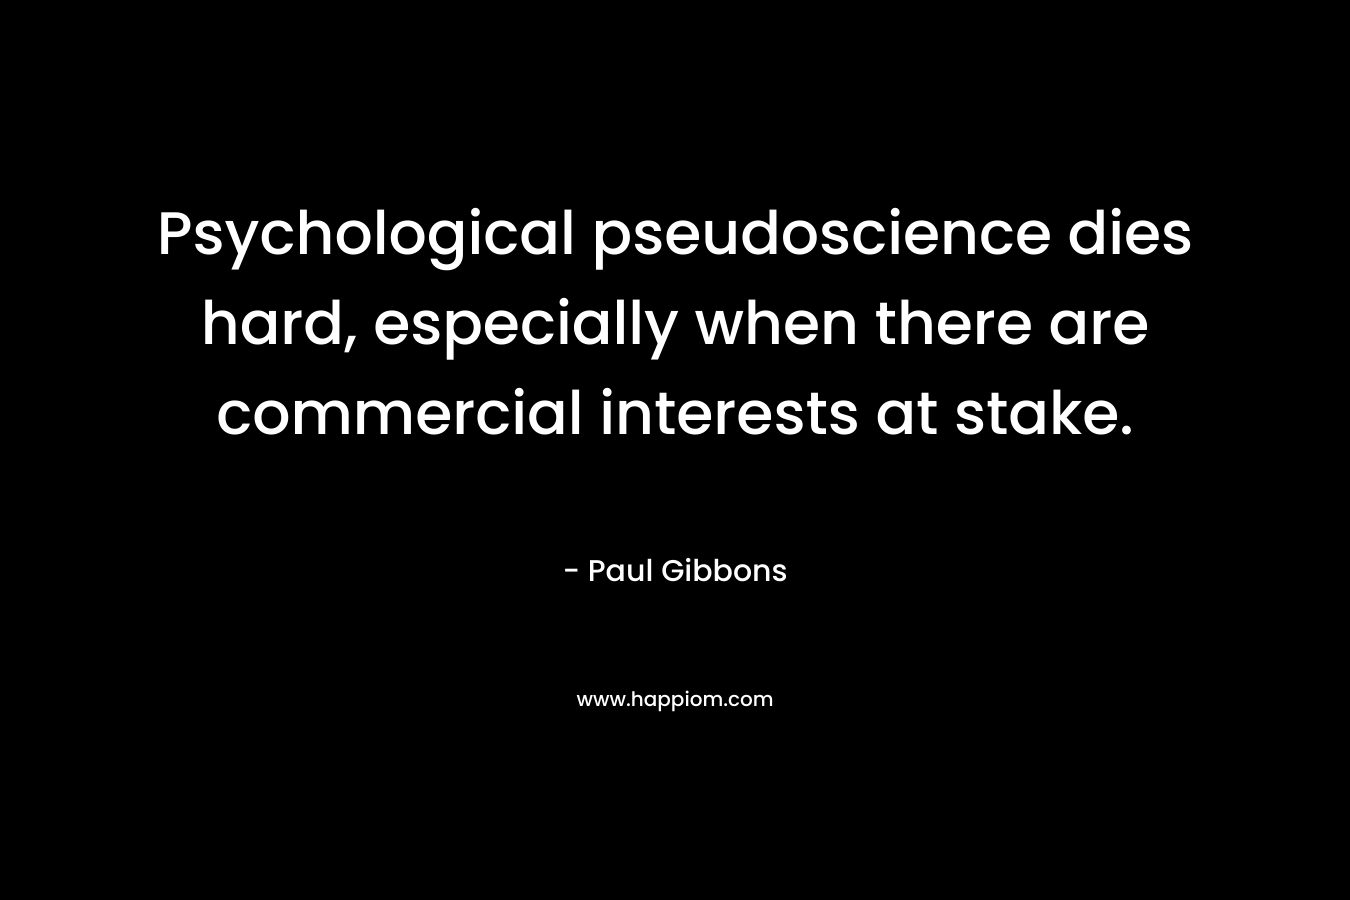 Psychological pseudoscience dies hard, especially when there are commercial interests at stake. – Paul Gibbons